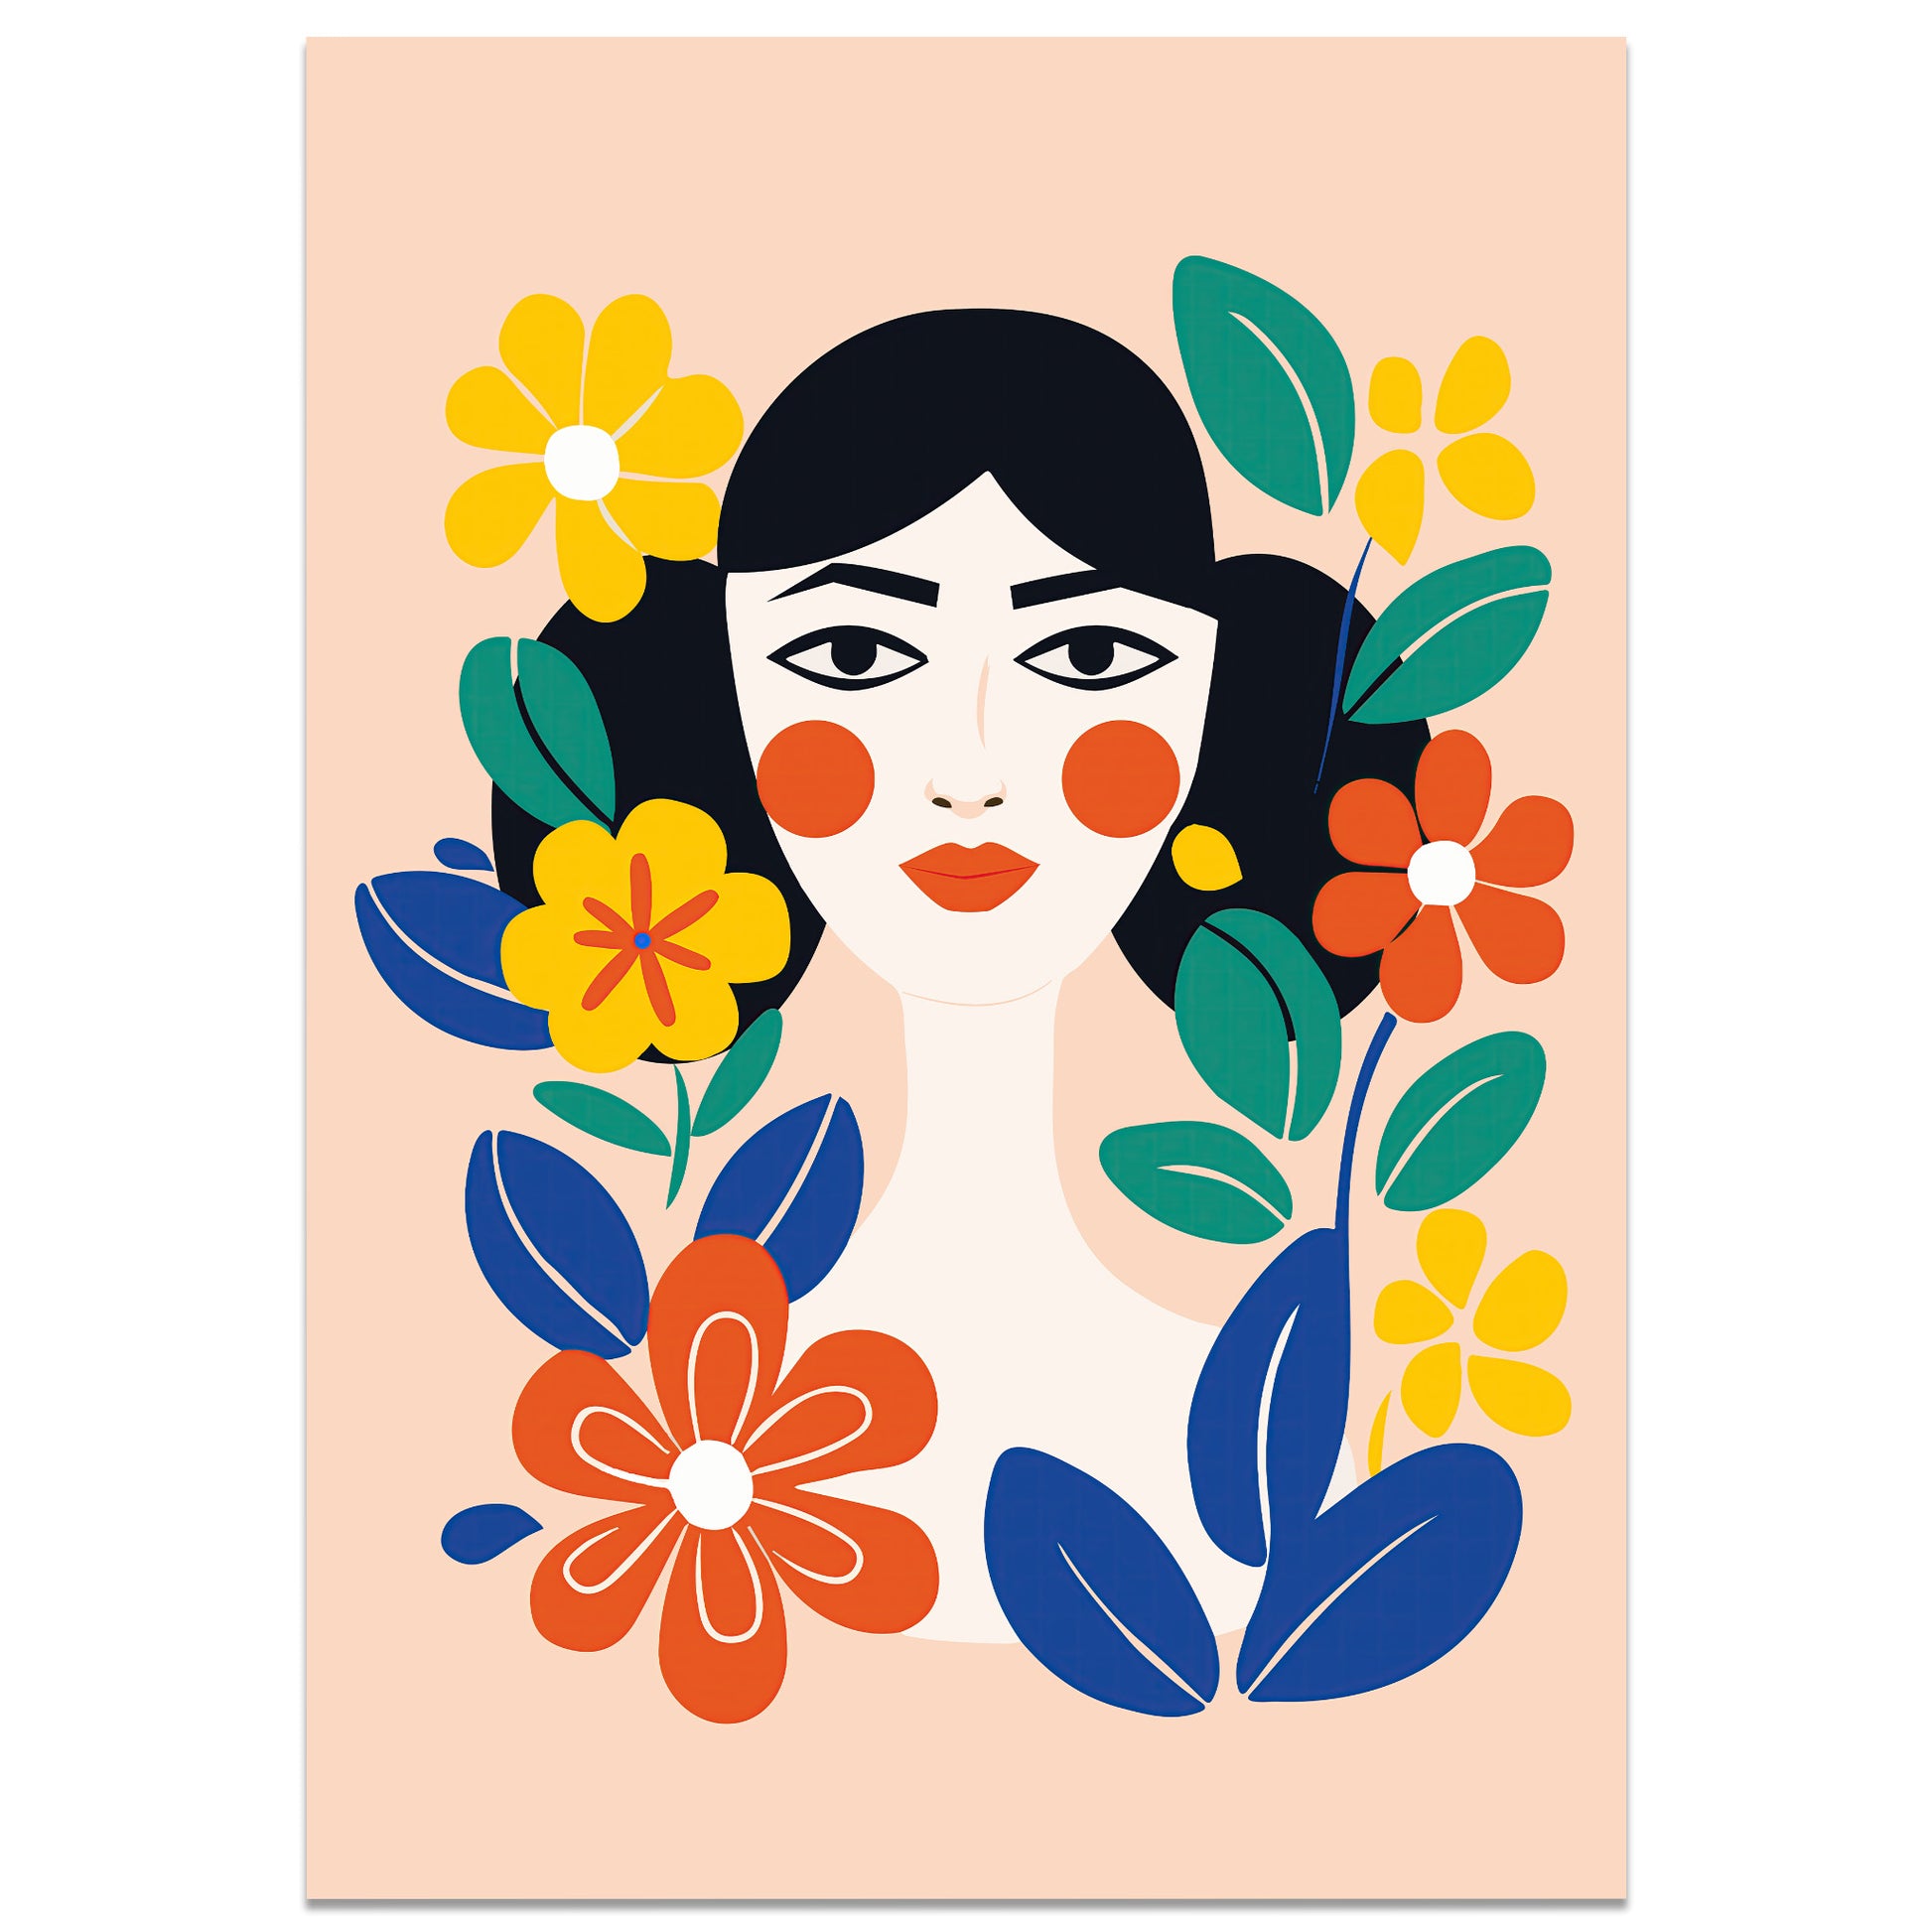 Art print of woman with stylized floral design